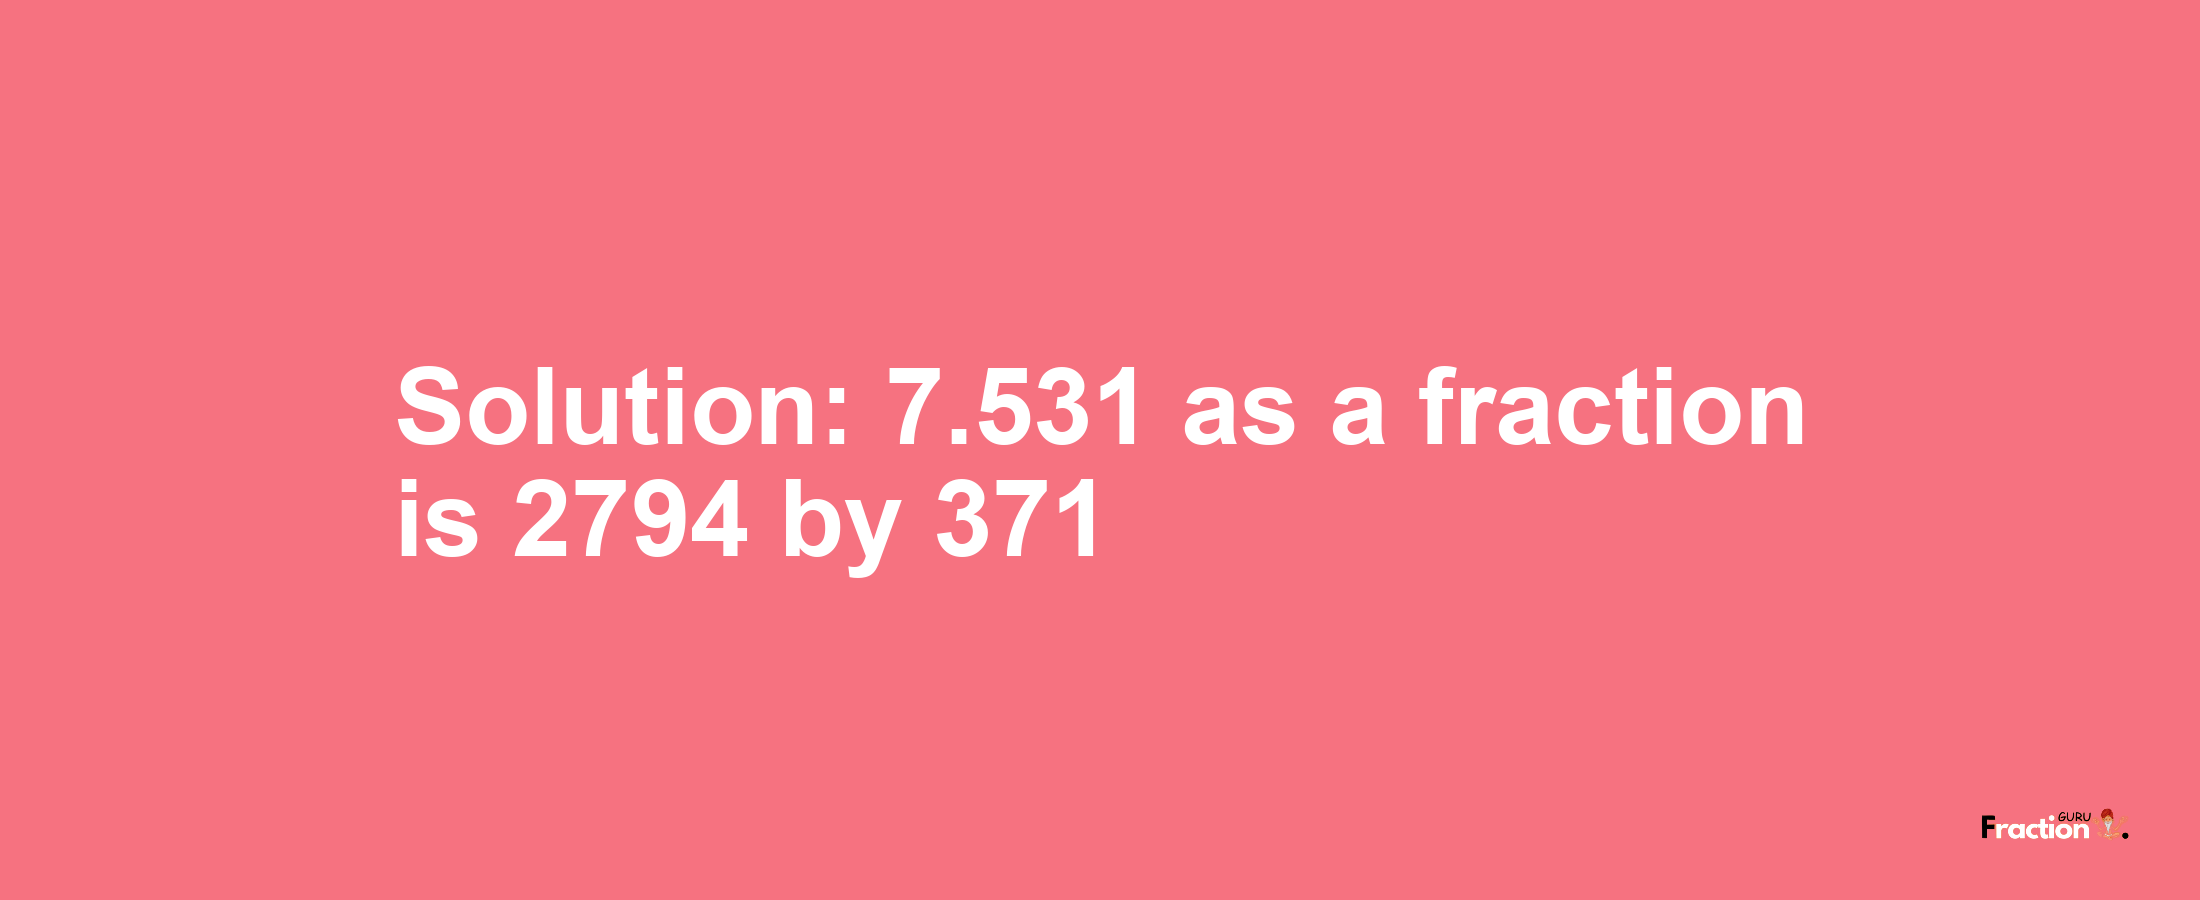 Solution:7.531 as a fraction is 2794/371